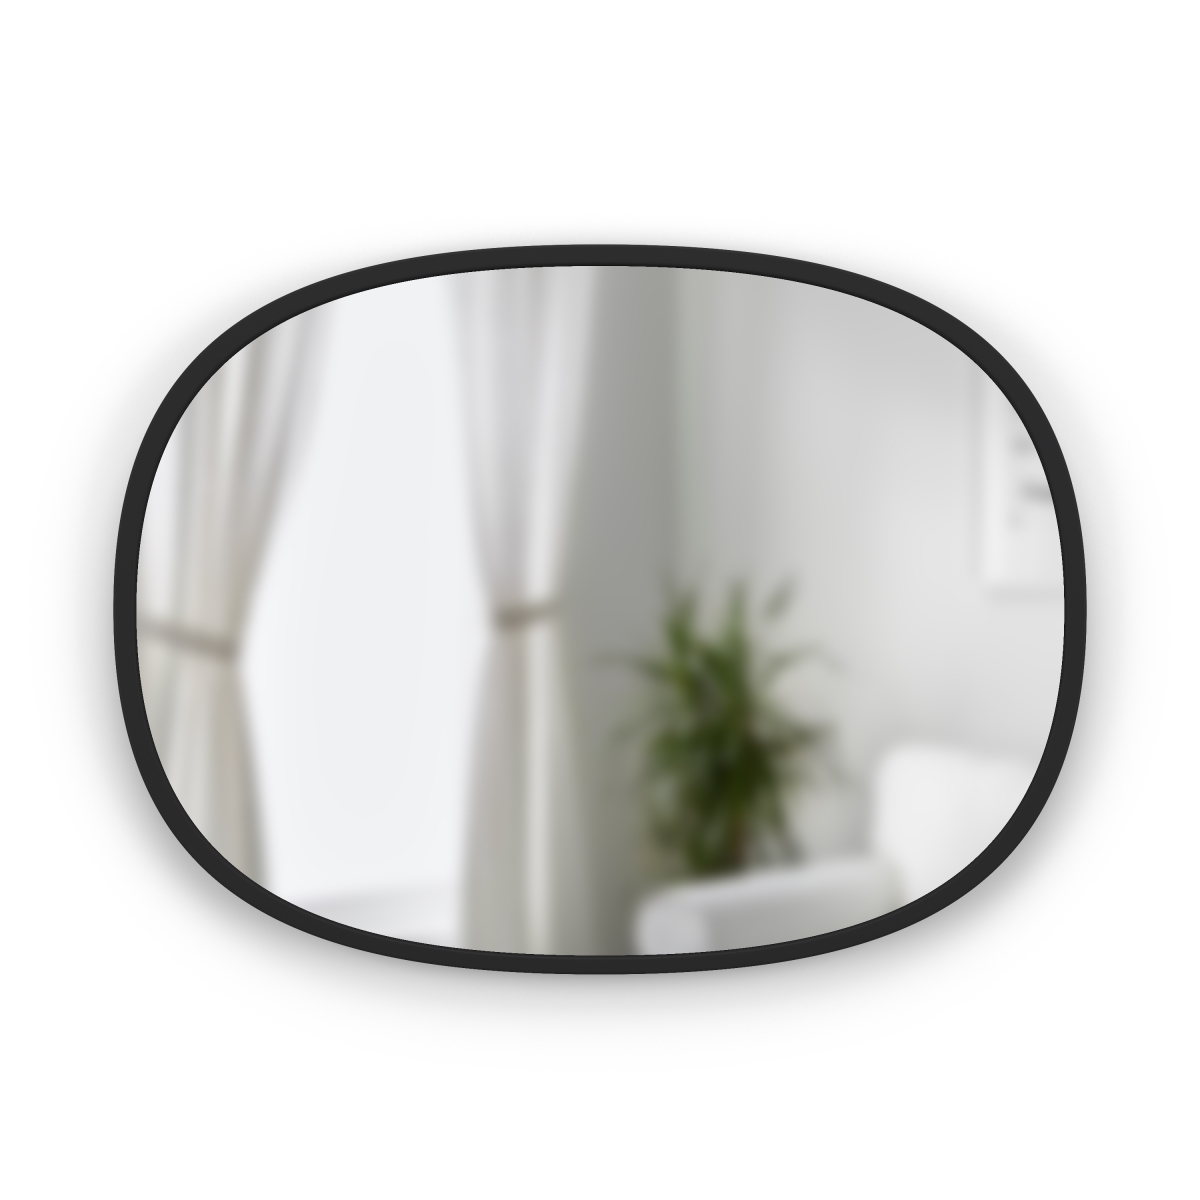 1013765-040 18 X 24 In. Hub Oval Decorative Hanging Wall Mirror With Protective Rubber Frame, Black